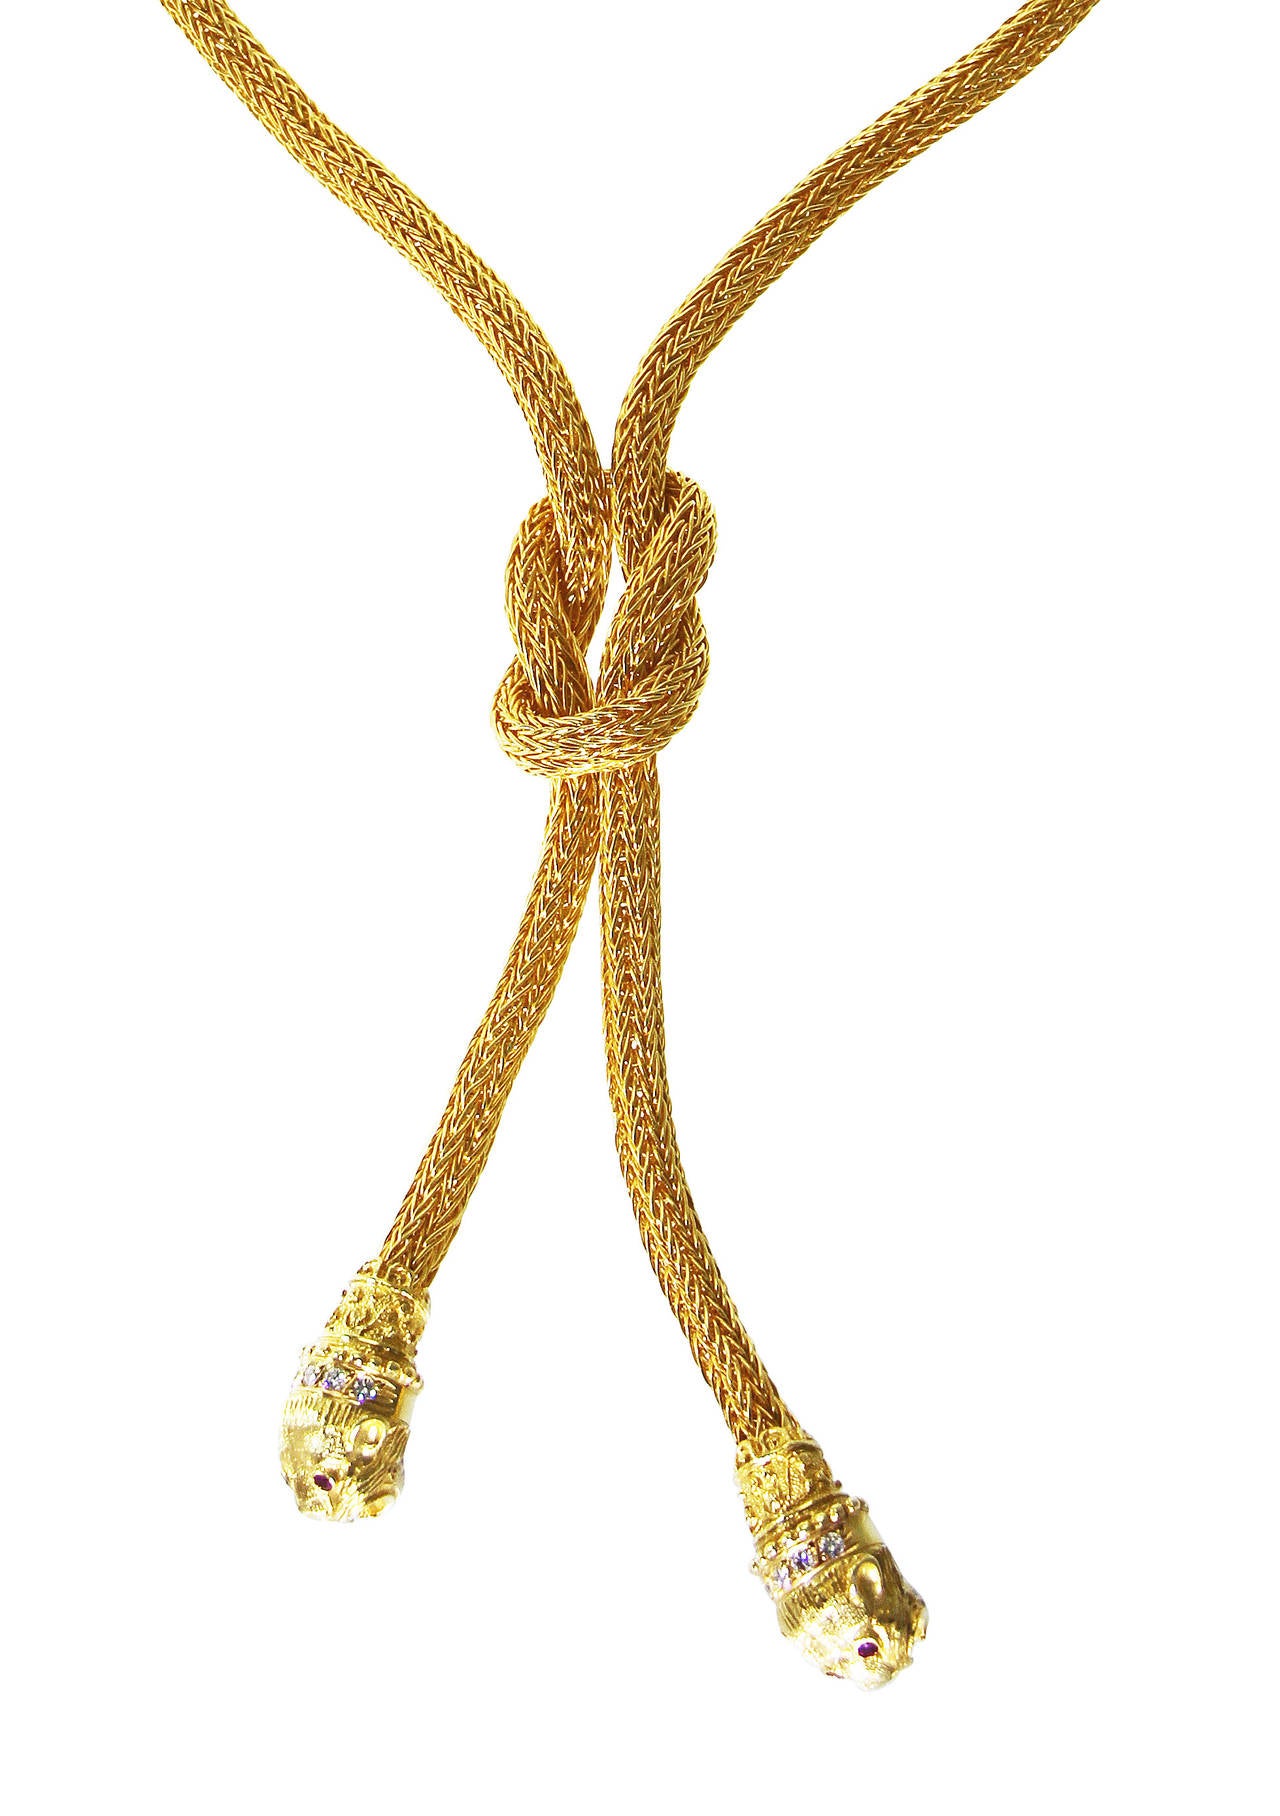 An 18 karat gold and diamond lion's head necklace by Lalaounis, Greece, the lariat style necklace composed of woven gold strands knotted at the center, the ends supporting lion's heads set with 10 round diamonds weighing approximately 0.60 carat,